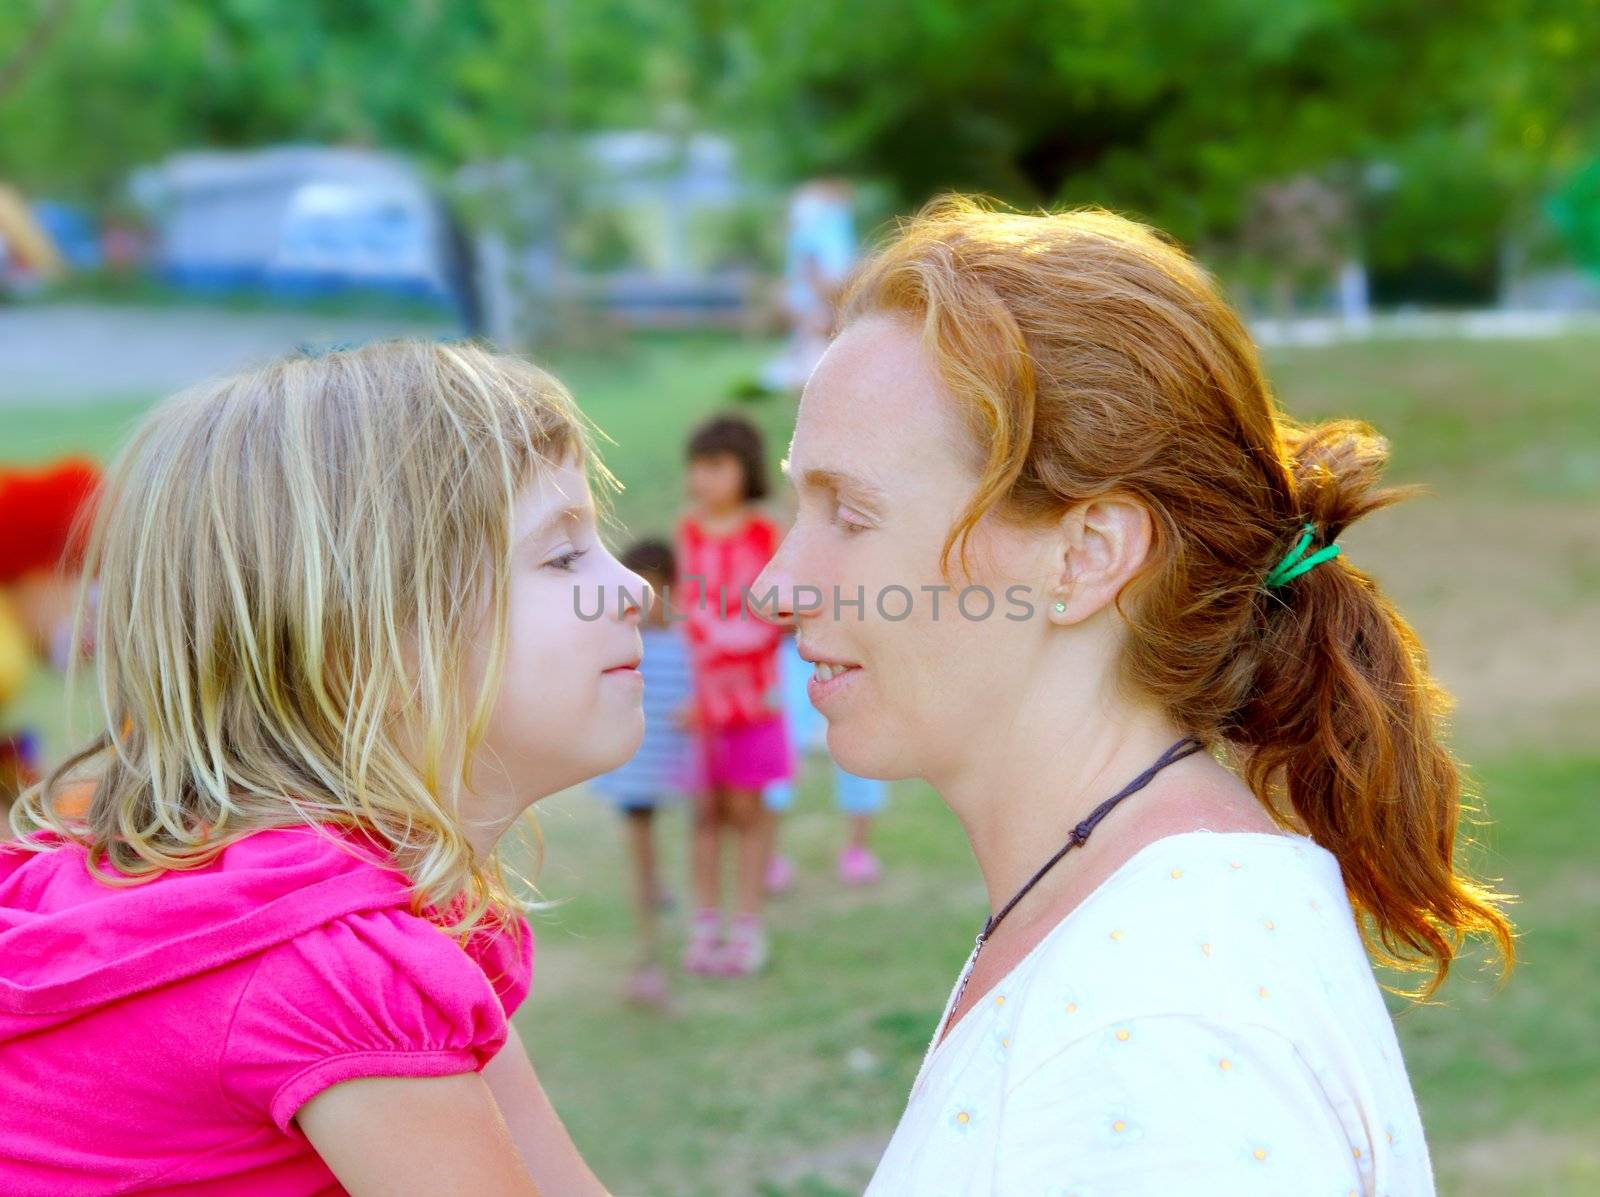 Mother and daughter profile playing in park by lunamarina